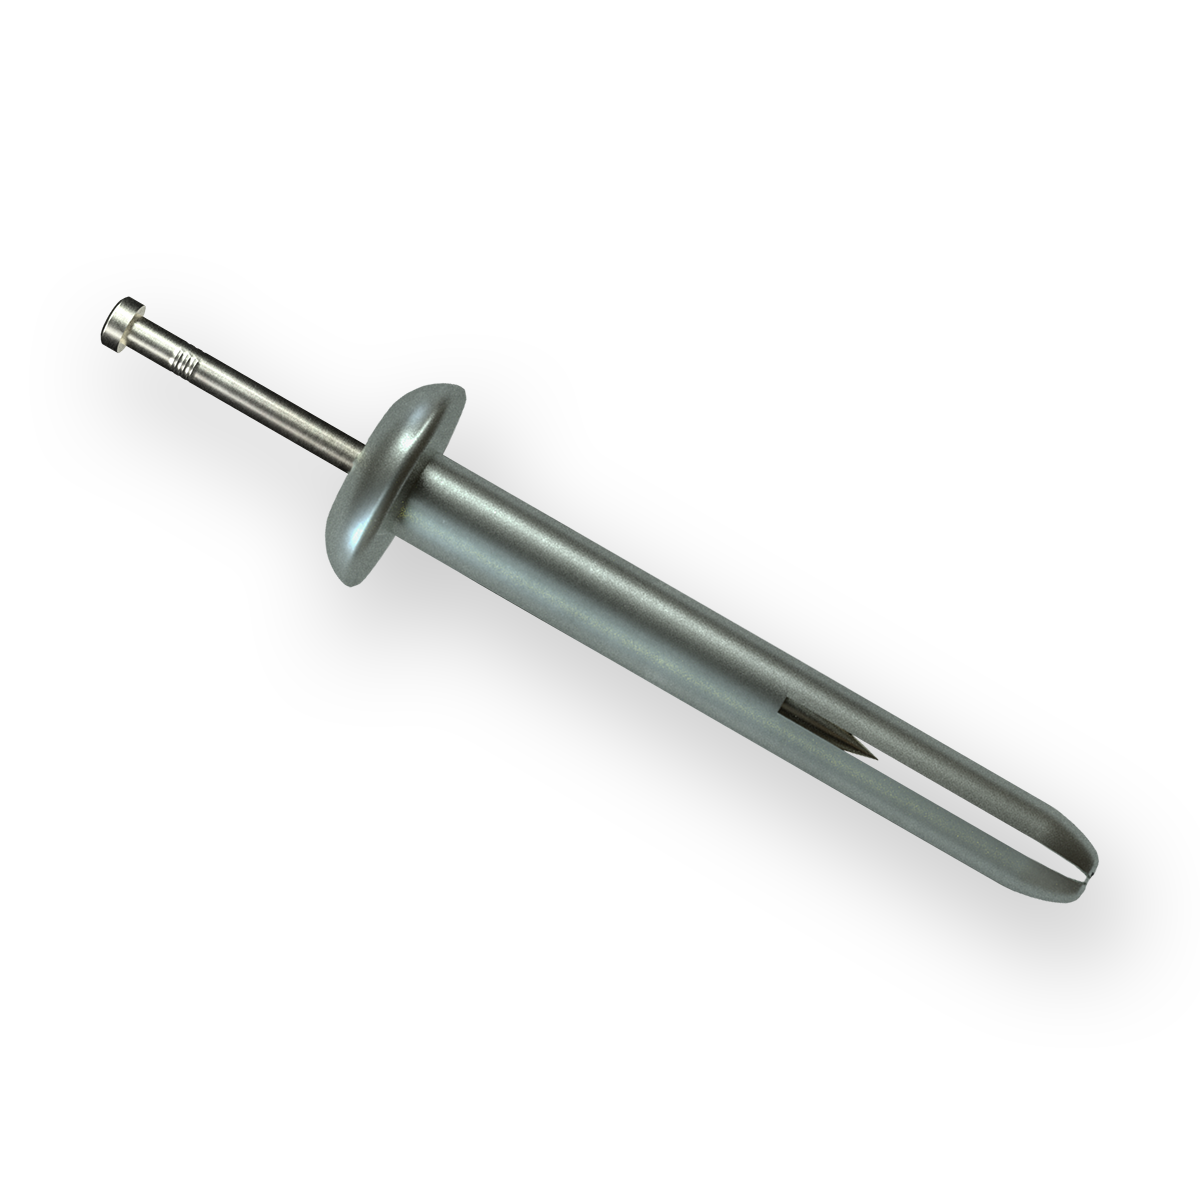 Drive-It™ Drive Pin Anchor- Zinc-Plated Carbon Steel Pin Mechanical Anchors Wej-It